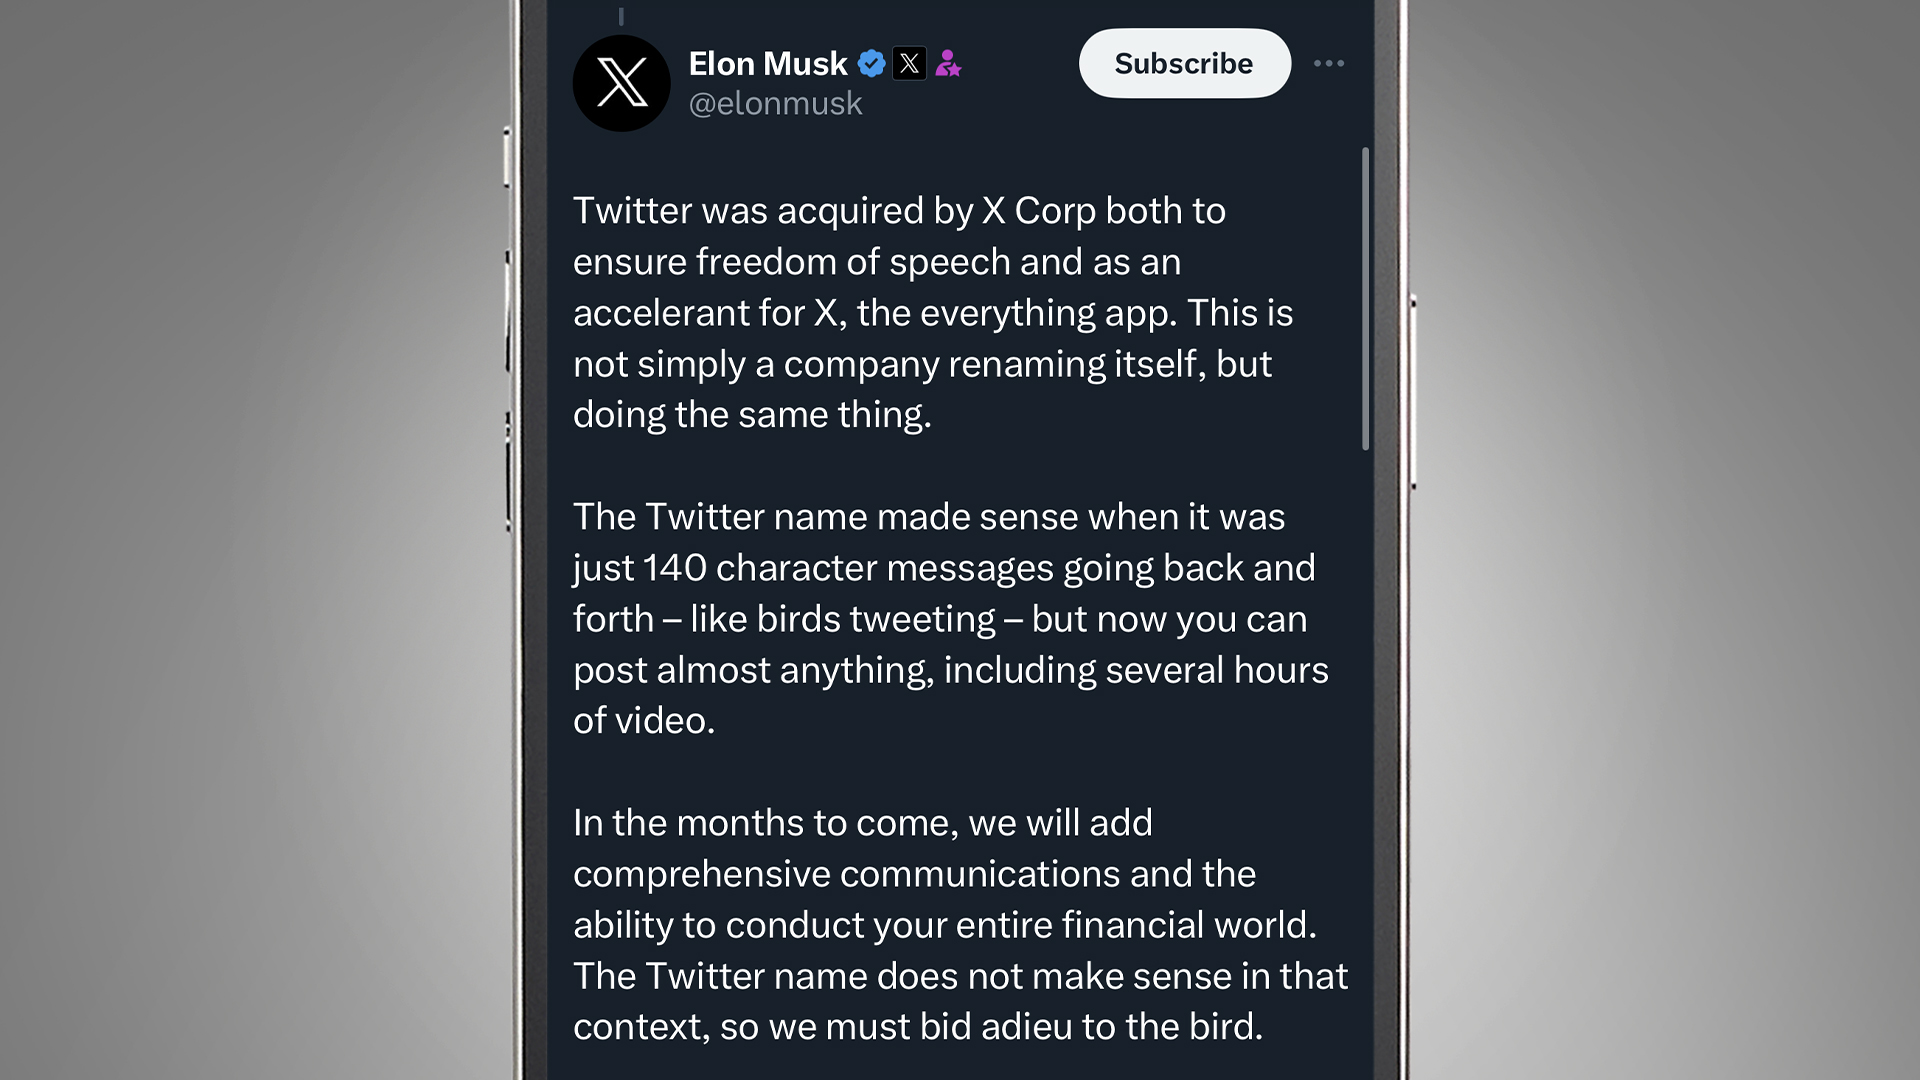 A phone screen on a grey background showing a Tweet from Elon Musk